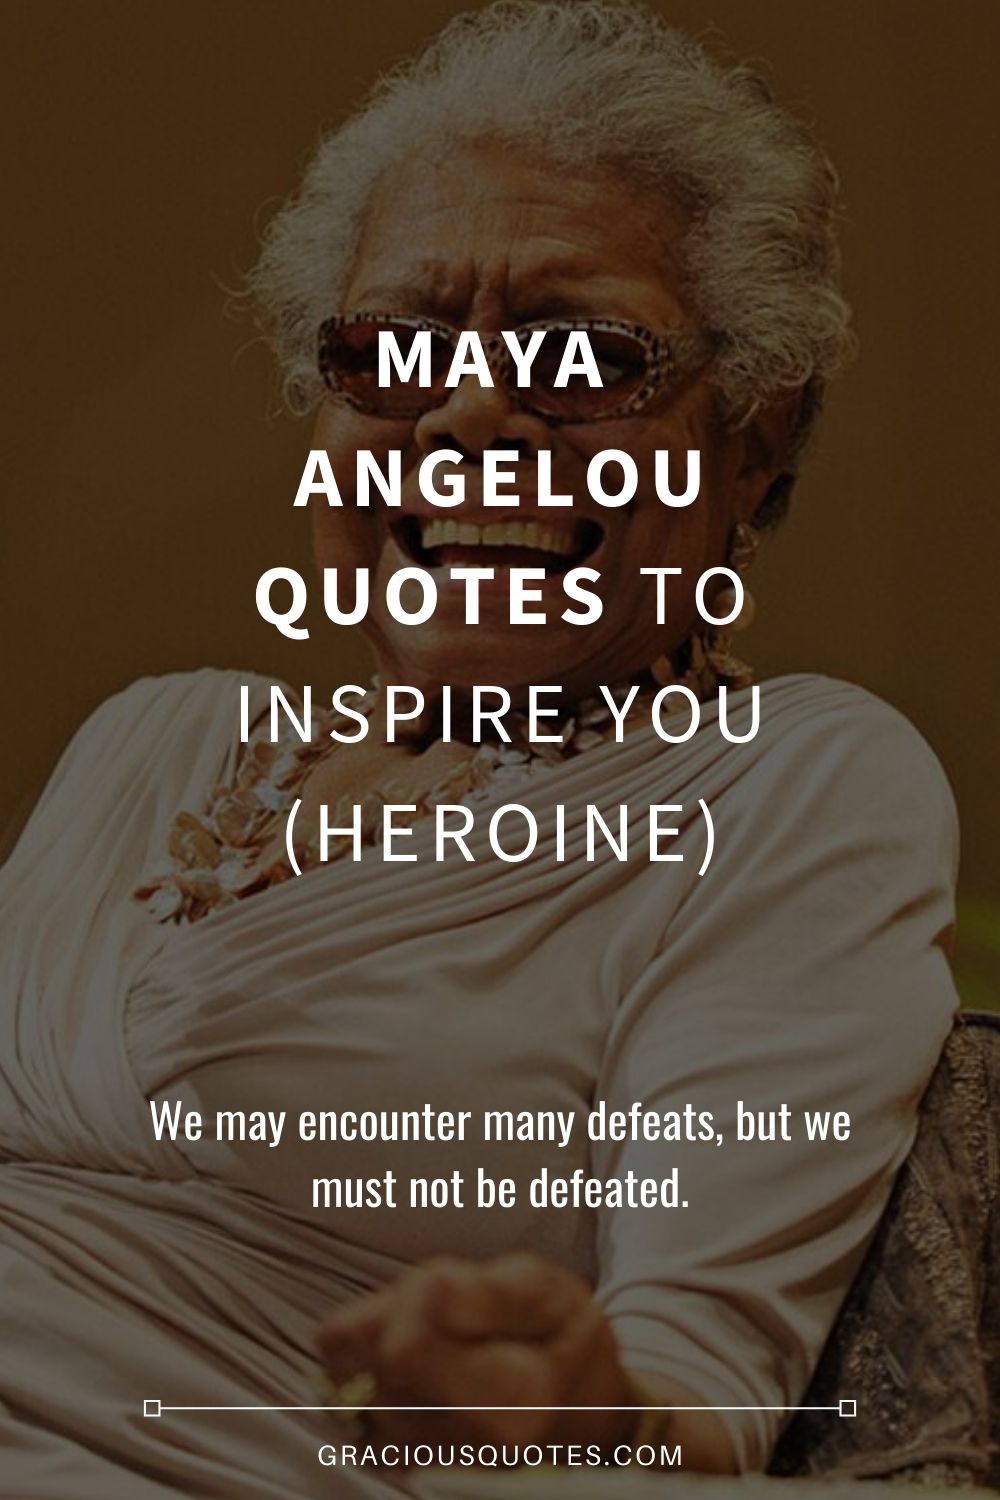 Maya Angelou Quotes to Inspire You (HEROINE) - Gracious Quotes